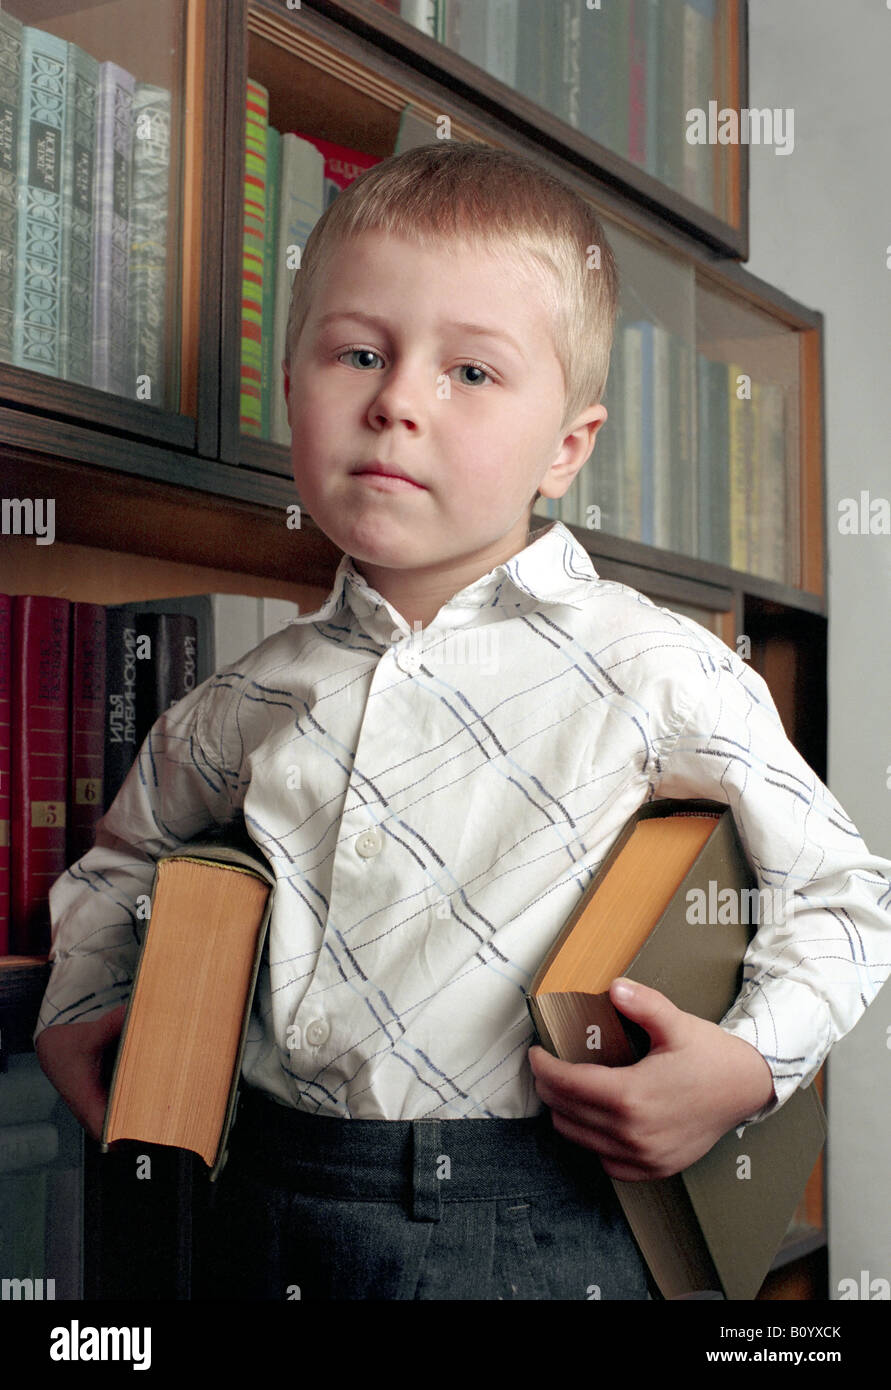 child in library Stock Photo